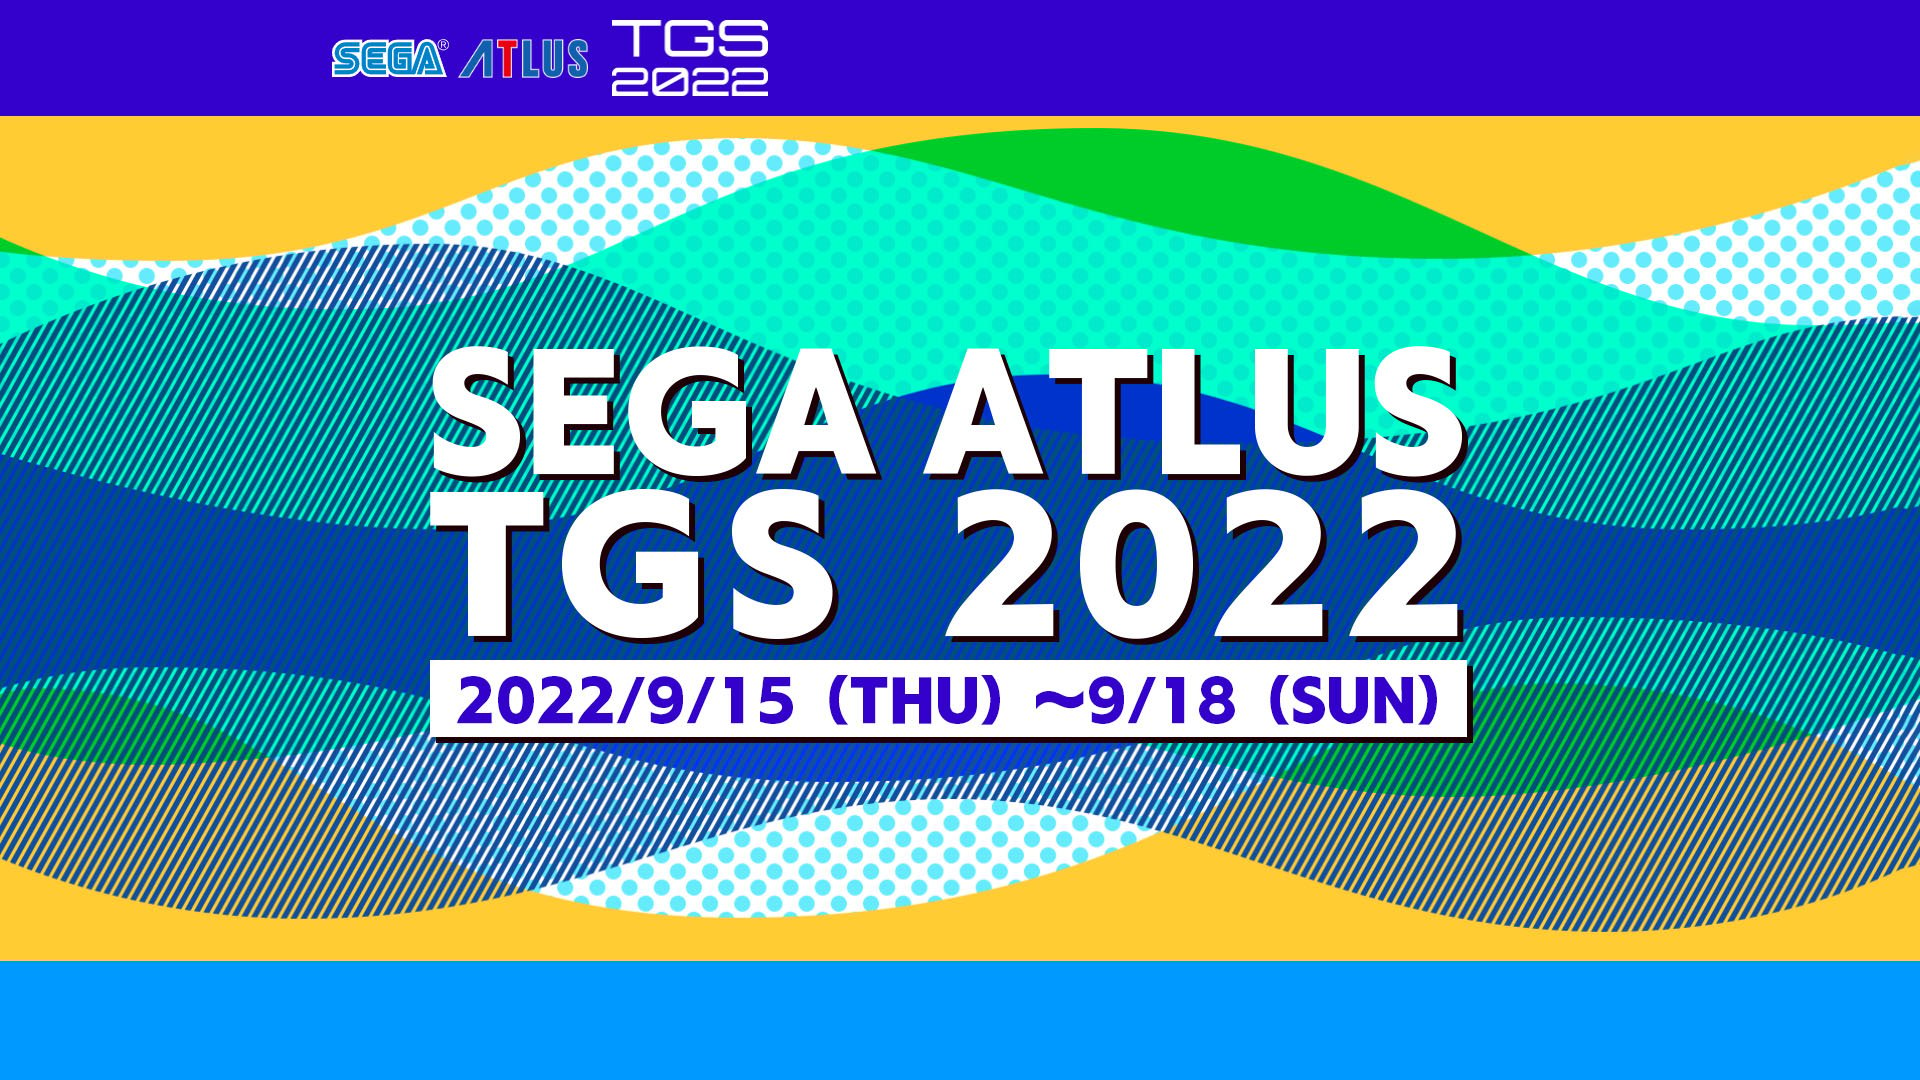 #
      SEGA and ATLUS announce TGS 2022 lineup, schedule